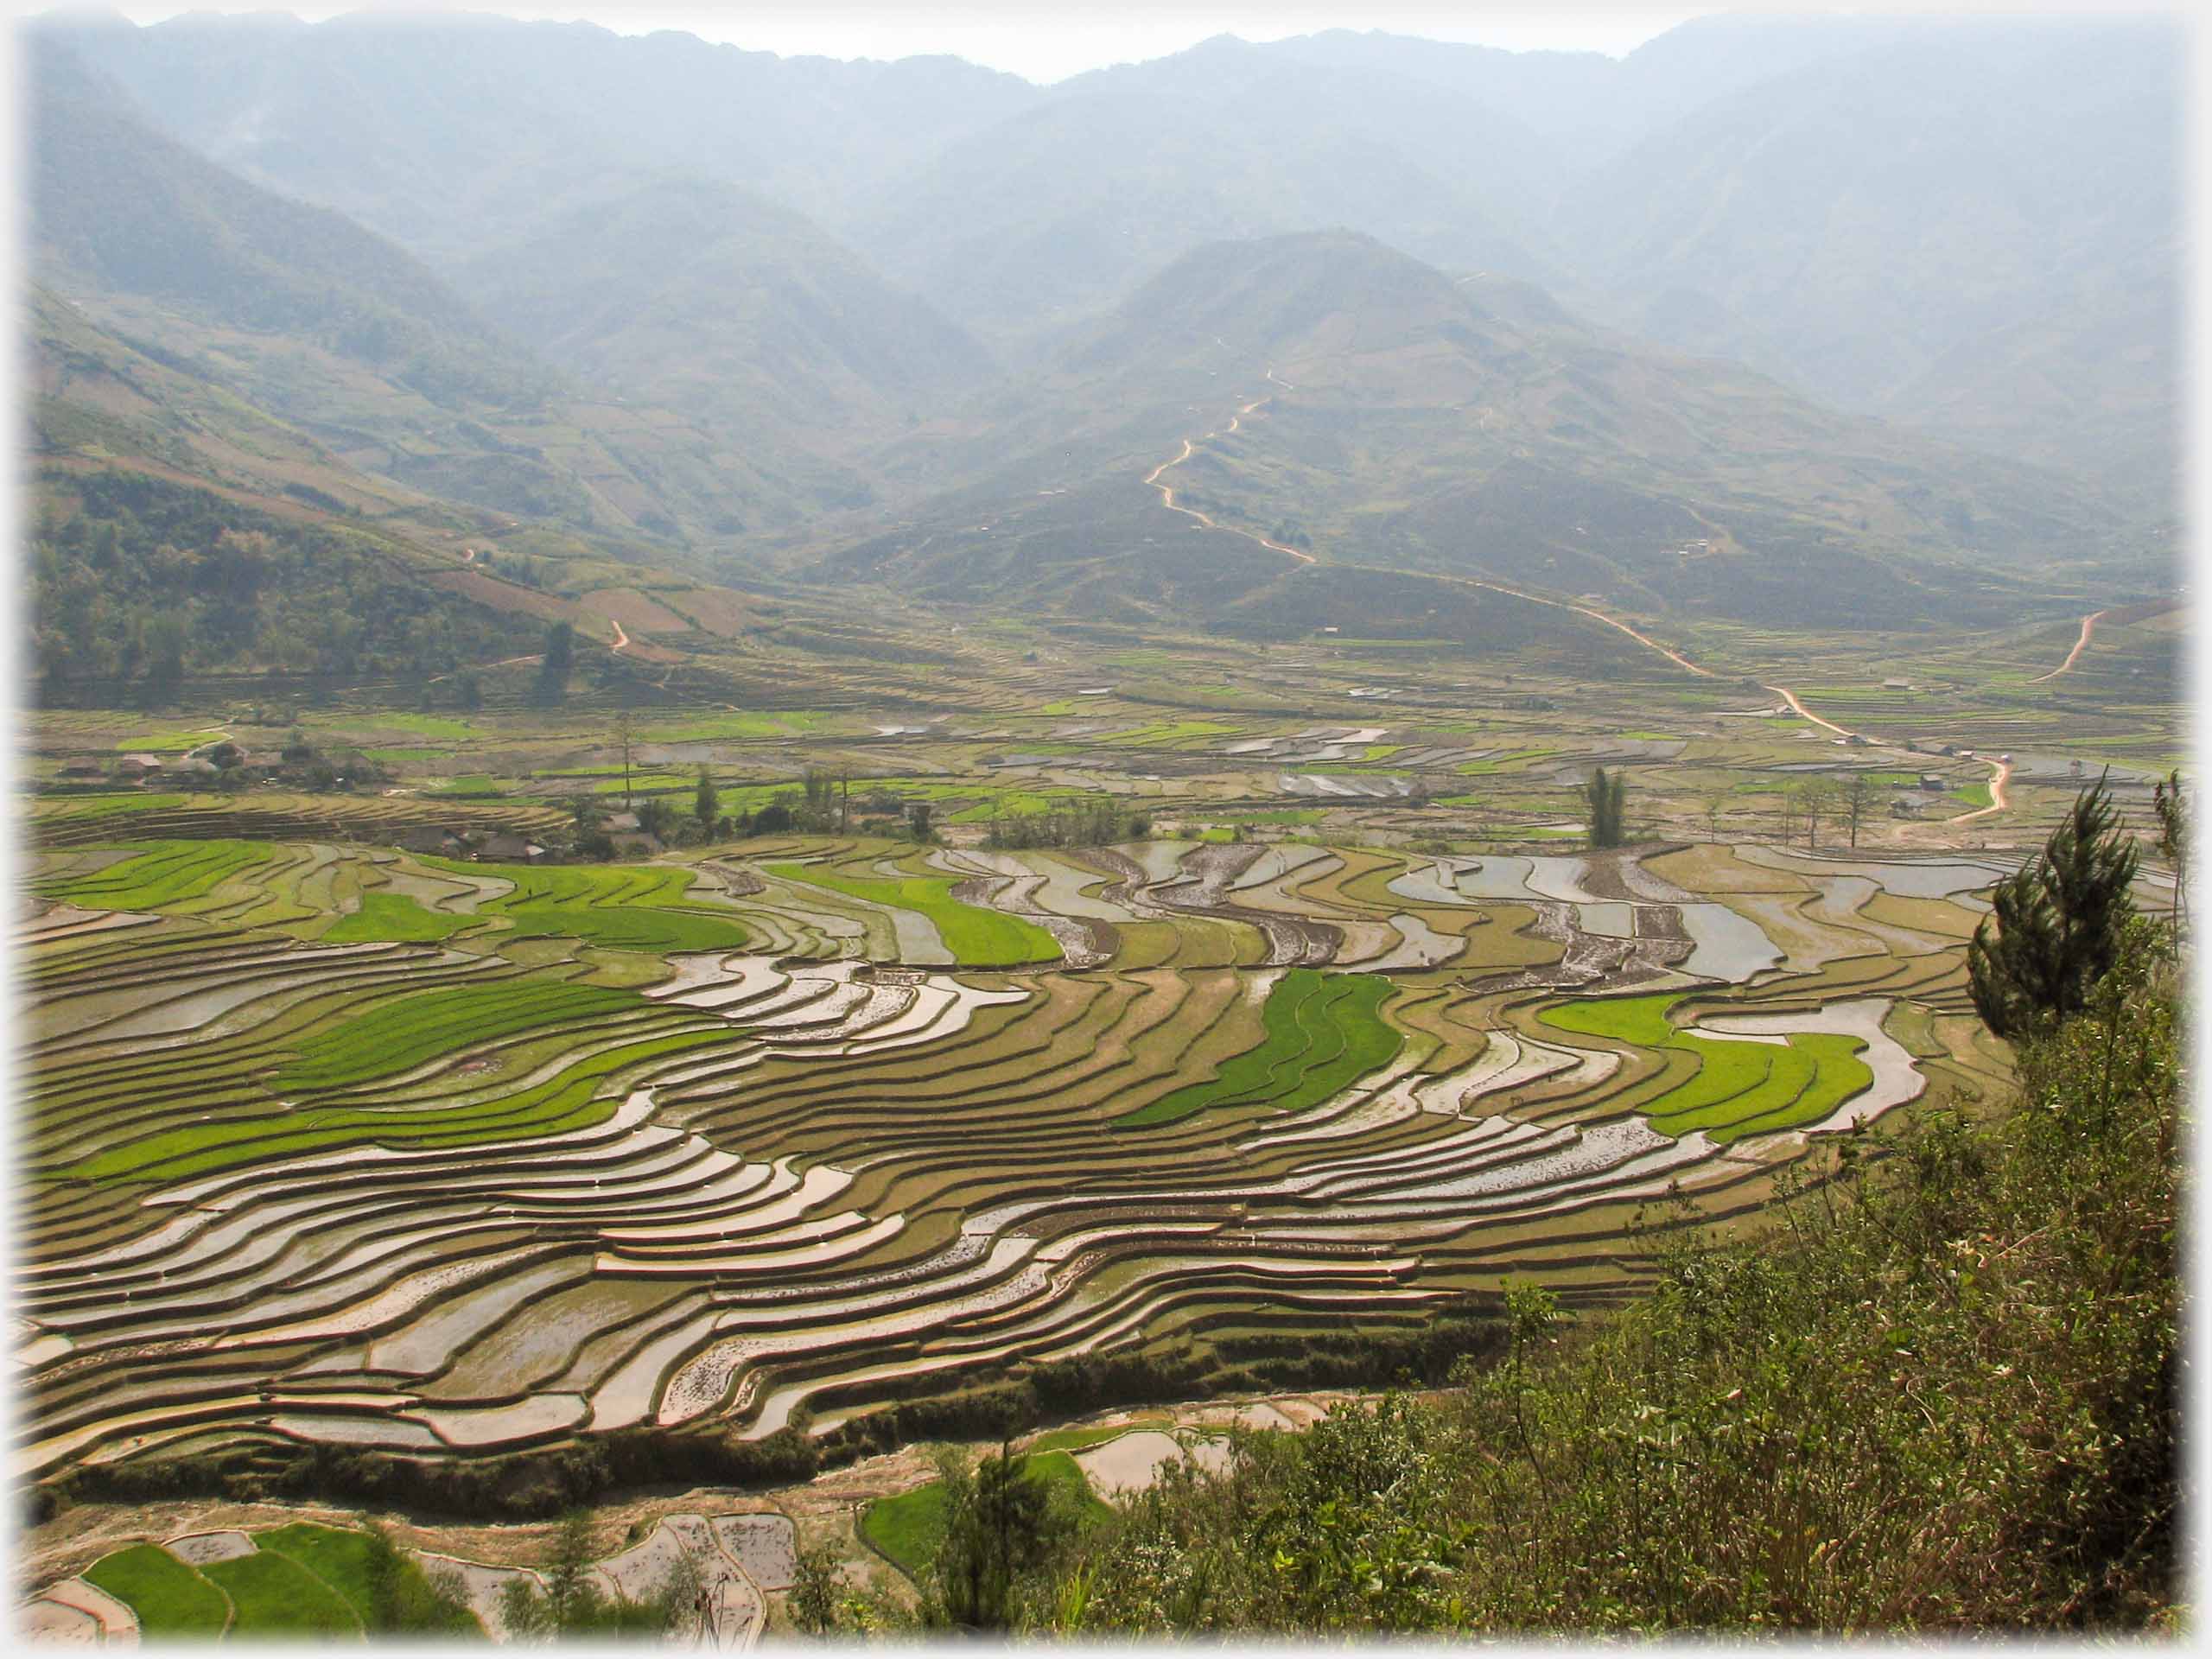 Wide valley with mountains, valley floor covered by shallow terraced fields some turning green.